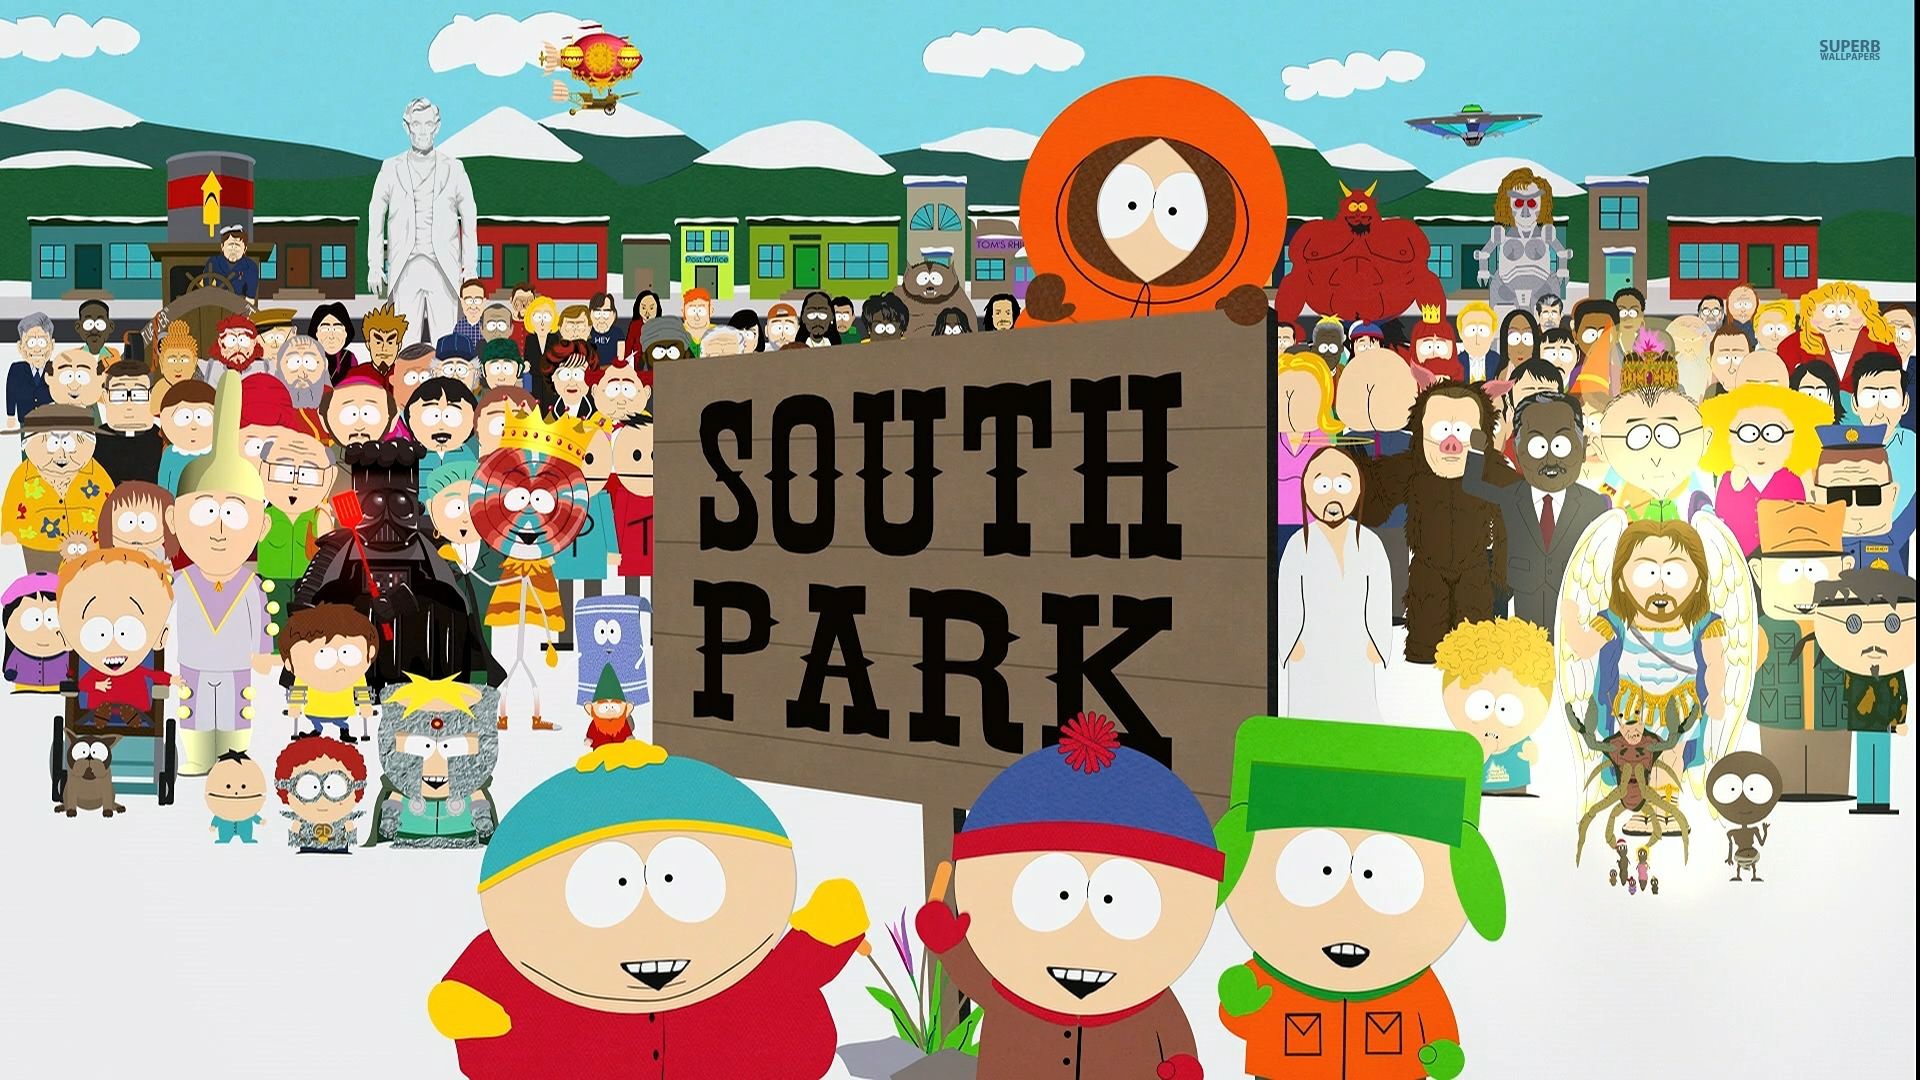 South Park Wallpapers HD entire crew cast